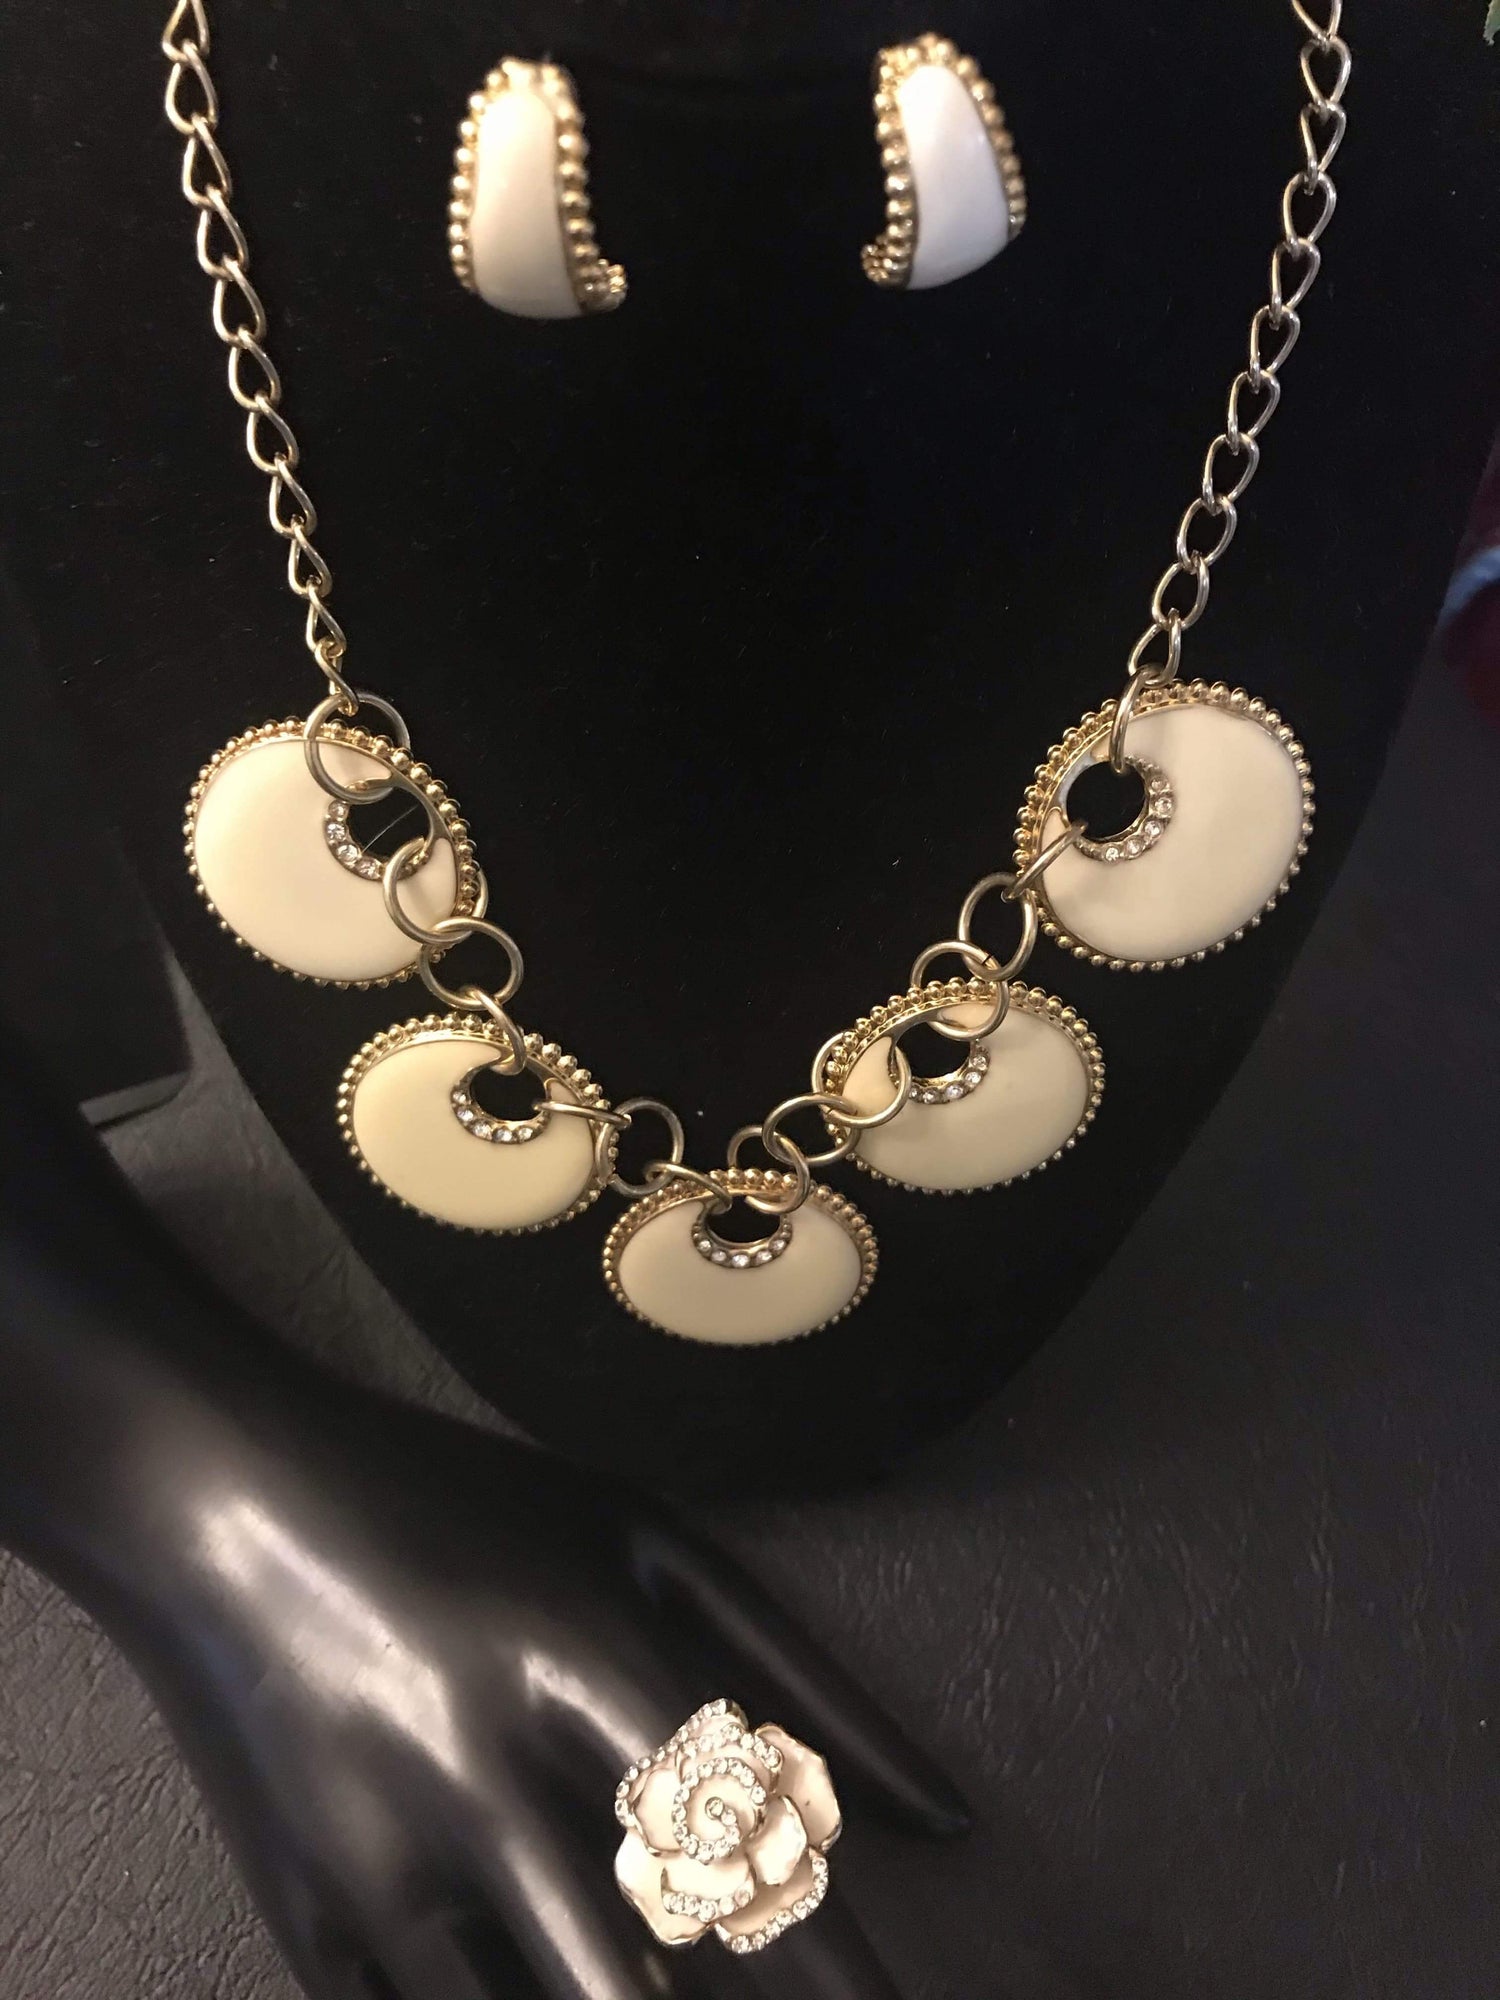 Enamel necklace earrings set for women Ivory color with rhinestone jewelry